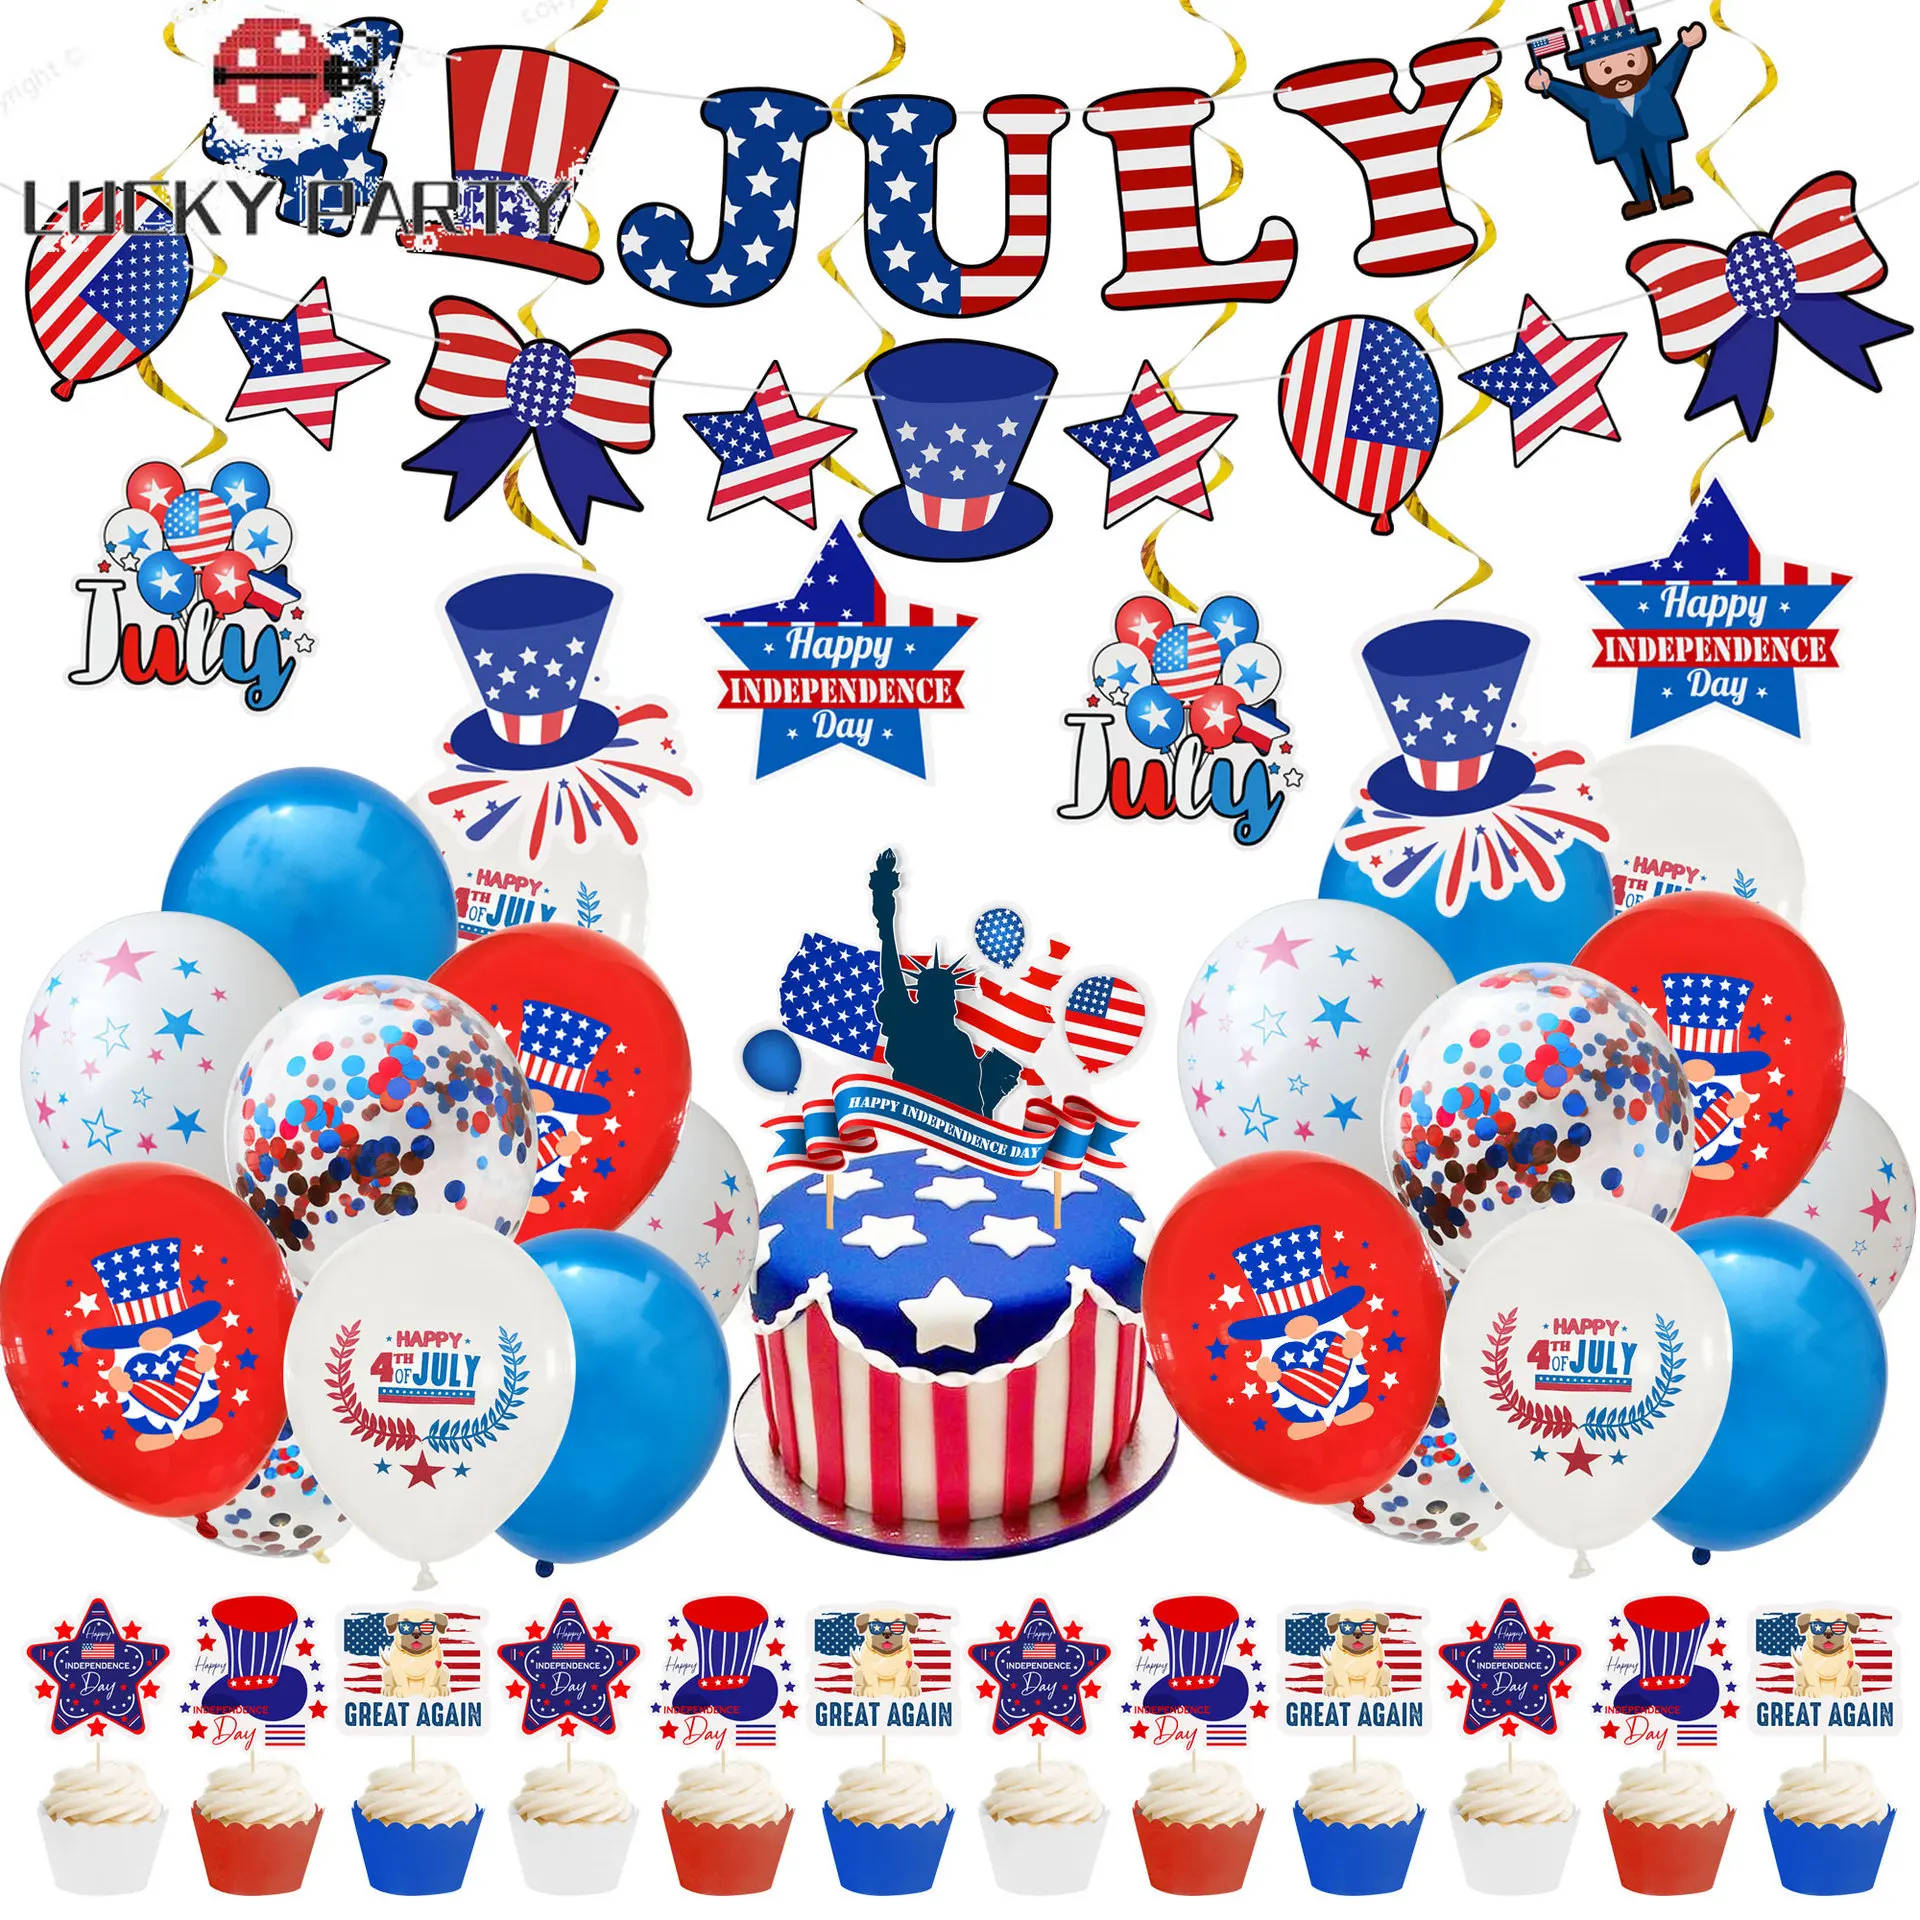 

Amawill USA 4Th of July United States Independence Day Decoration National Flag Foil Balloons Hanging Swirl Decor American Birth